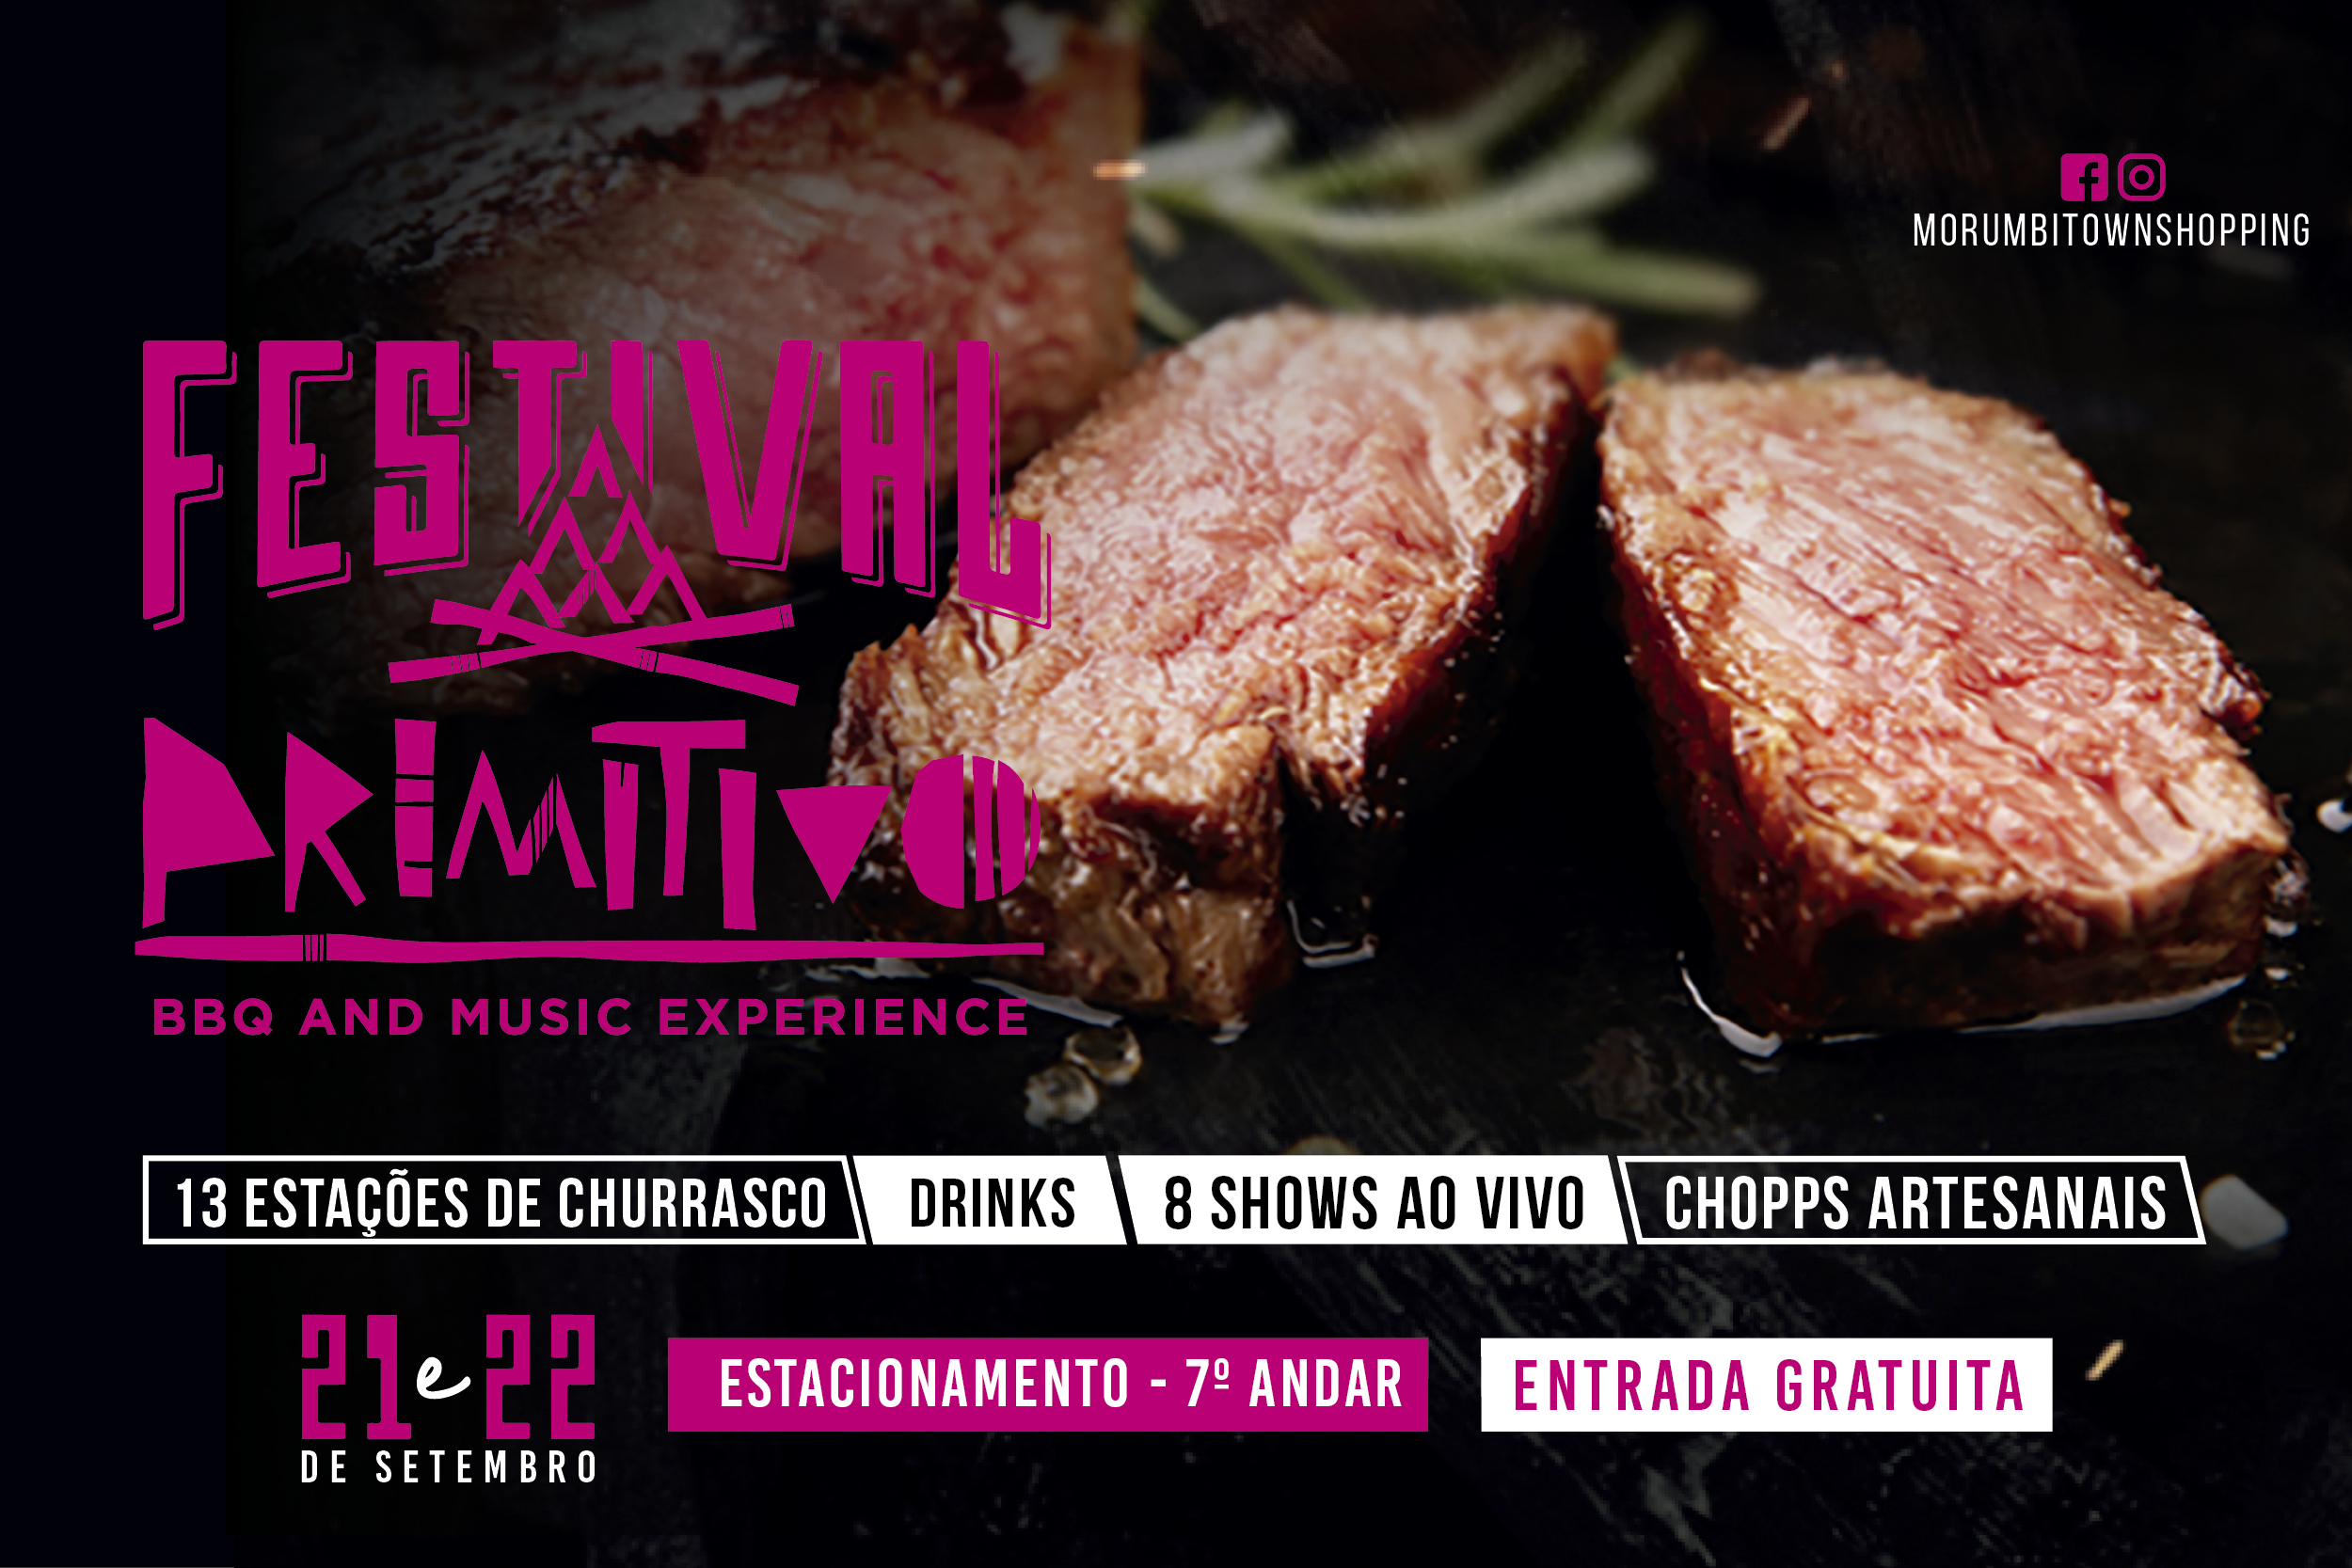 Festival Primitivo BBQ and Music Experience